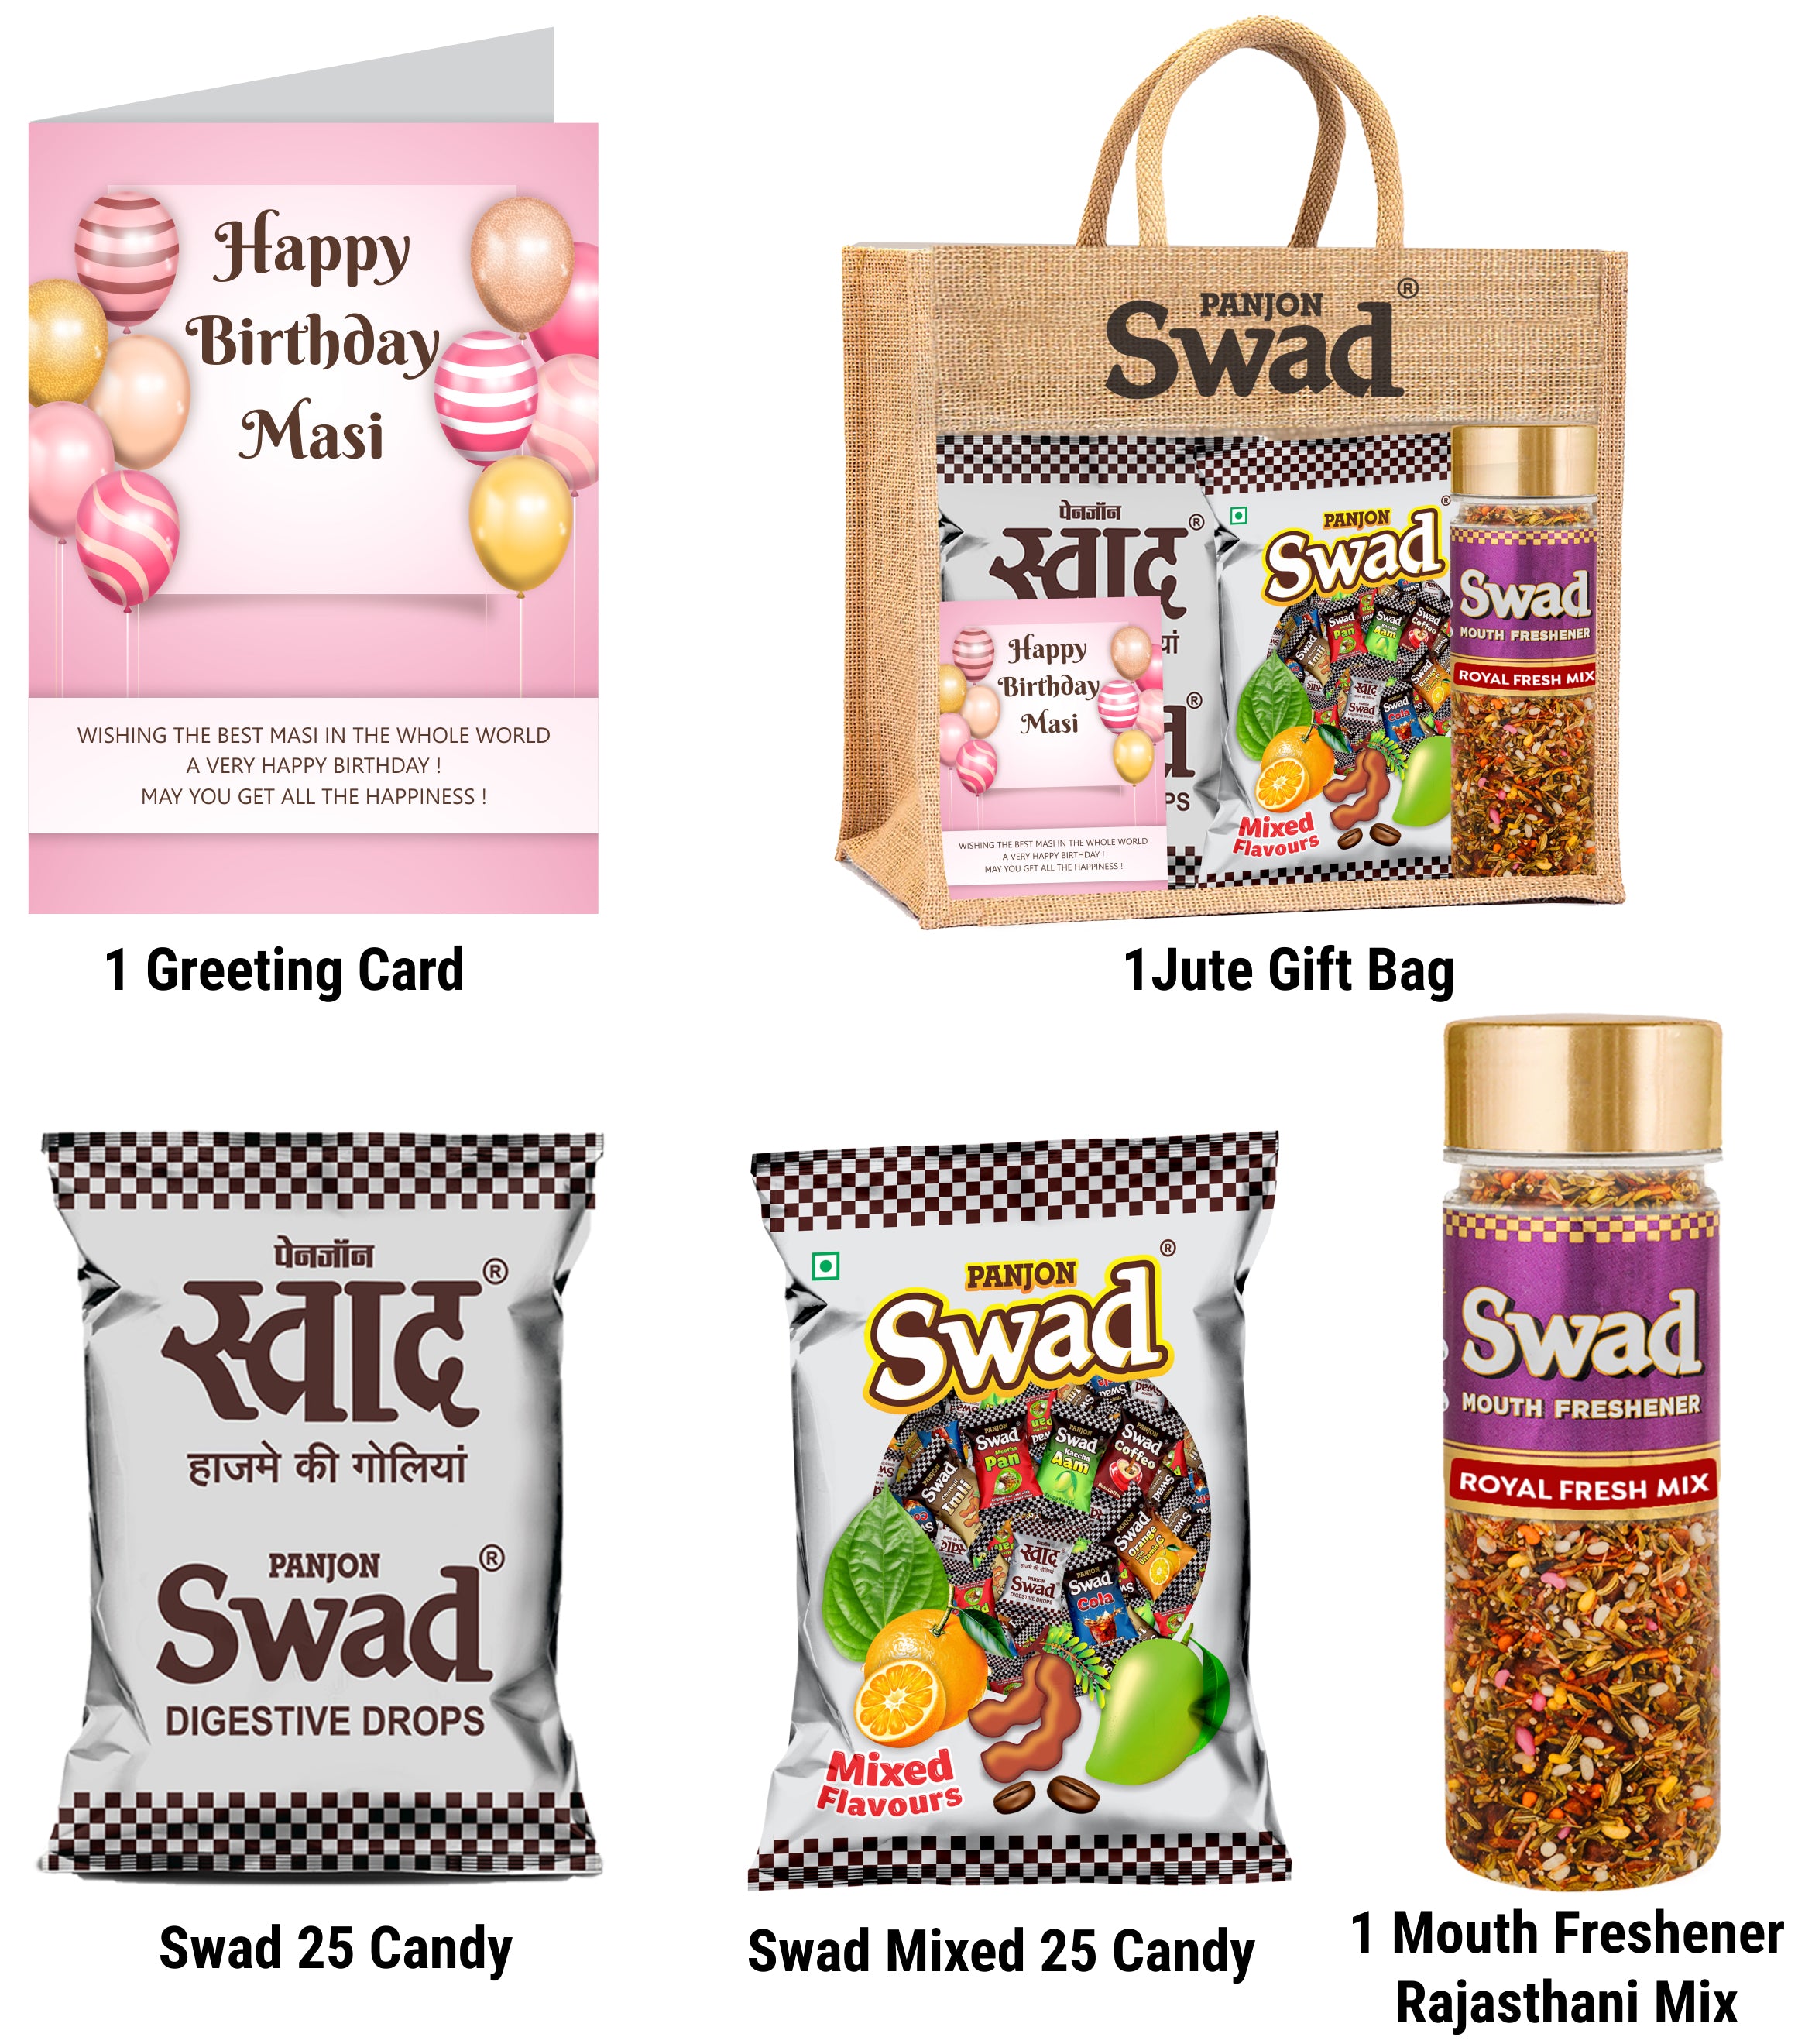 Swad Happy Birthday Masi/Mausi Gift with Card (25 Swad Candy, 25 Mixed Toffee, Royal Fresh Mix Mukhwas) in Jute Bag